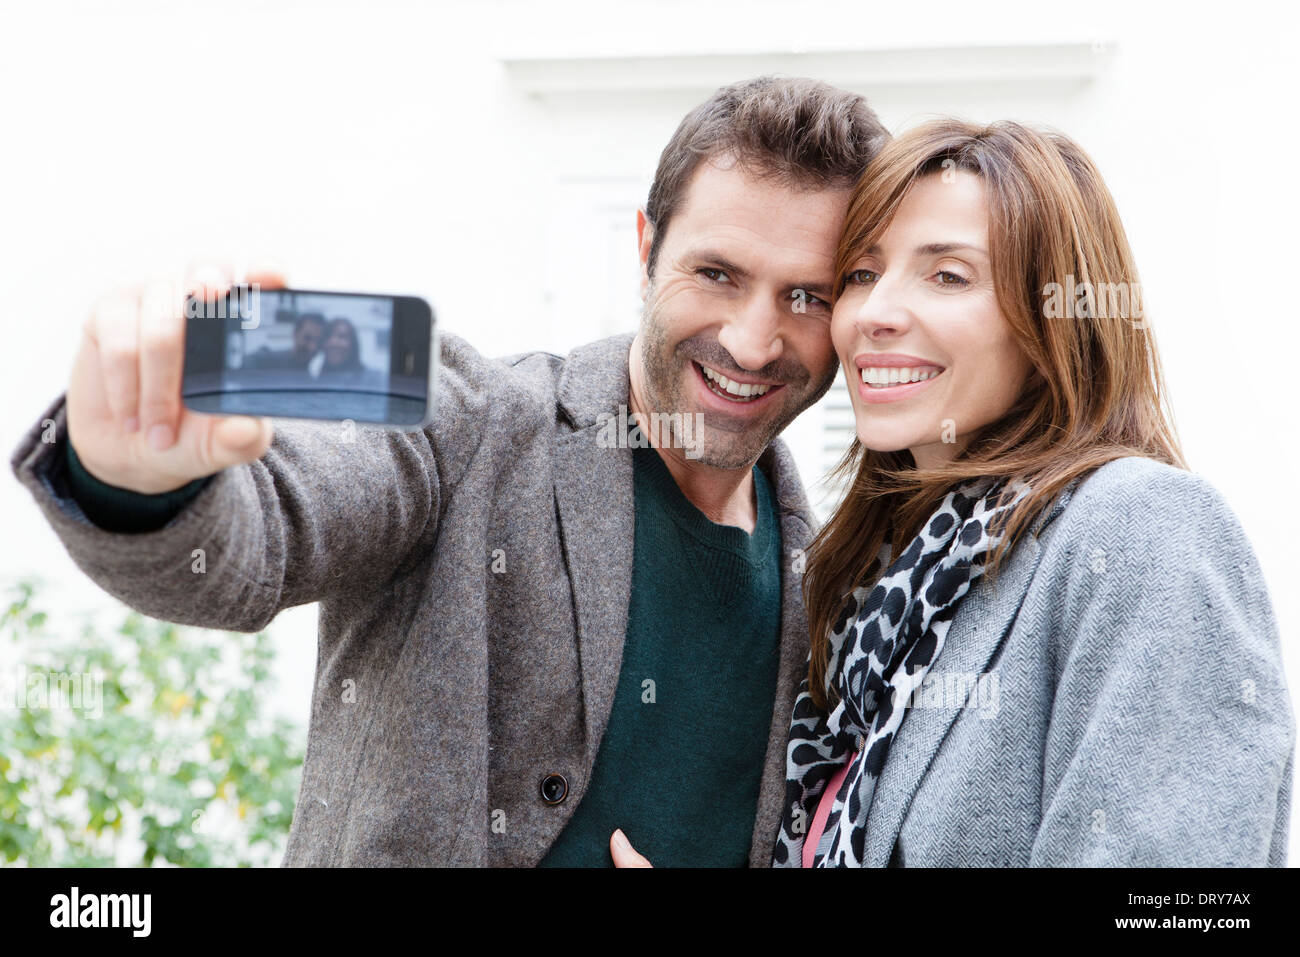 Couple taking self portrait with camera phone Stock Photo